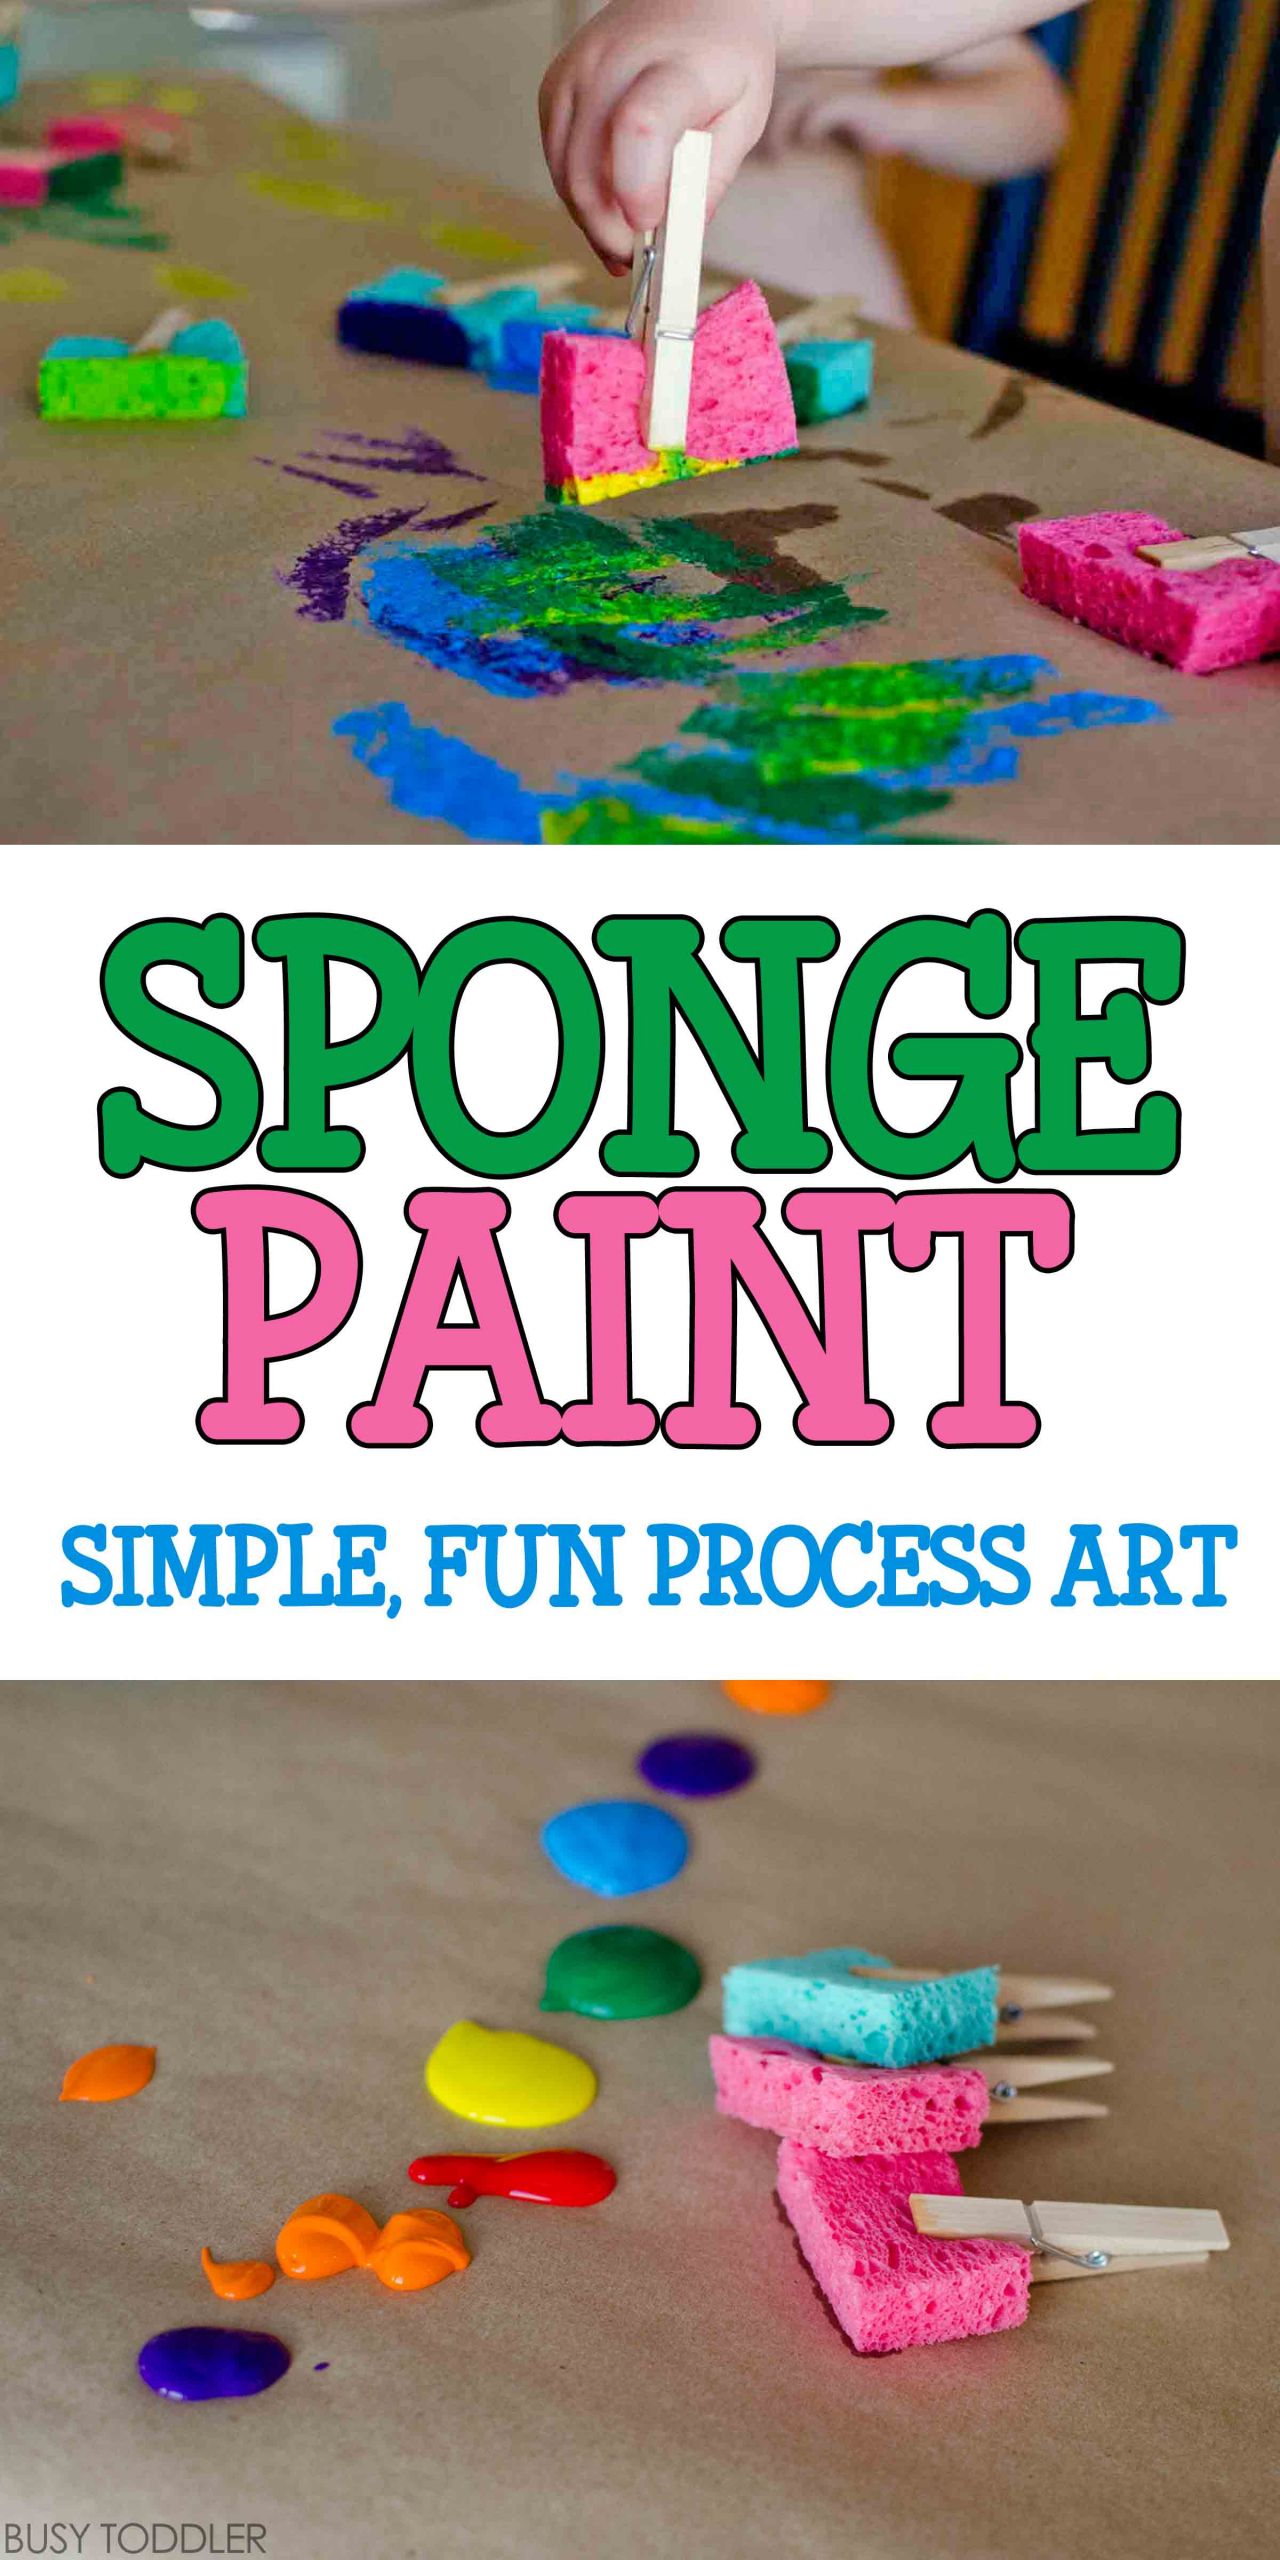 Paint Ideas For Preschoolers
 Sponge Painting Process Art Busy Toddler